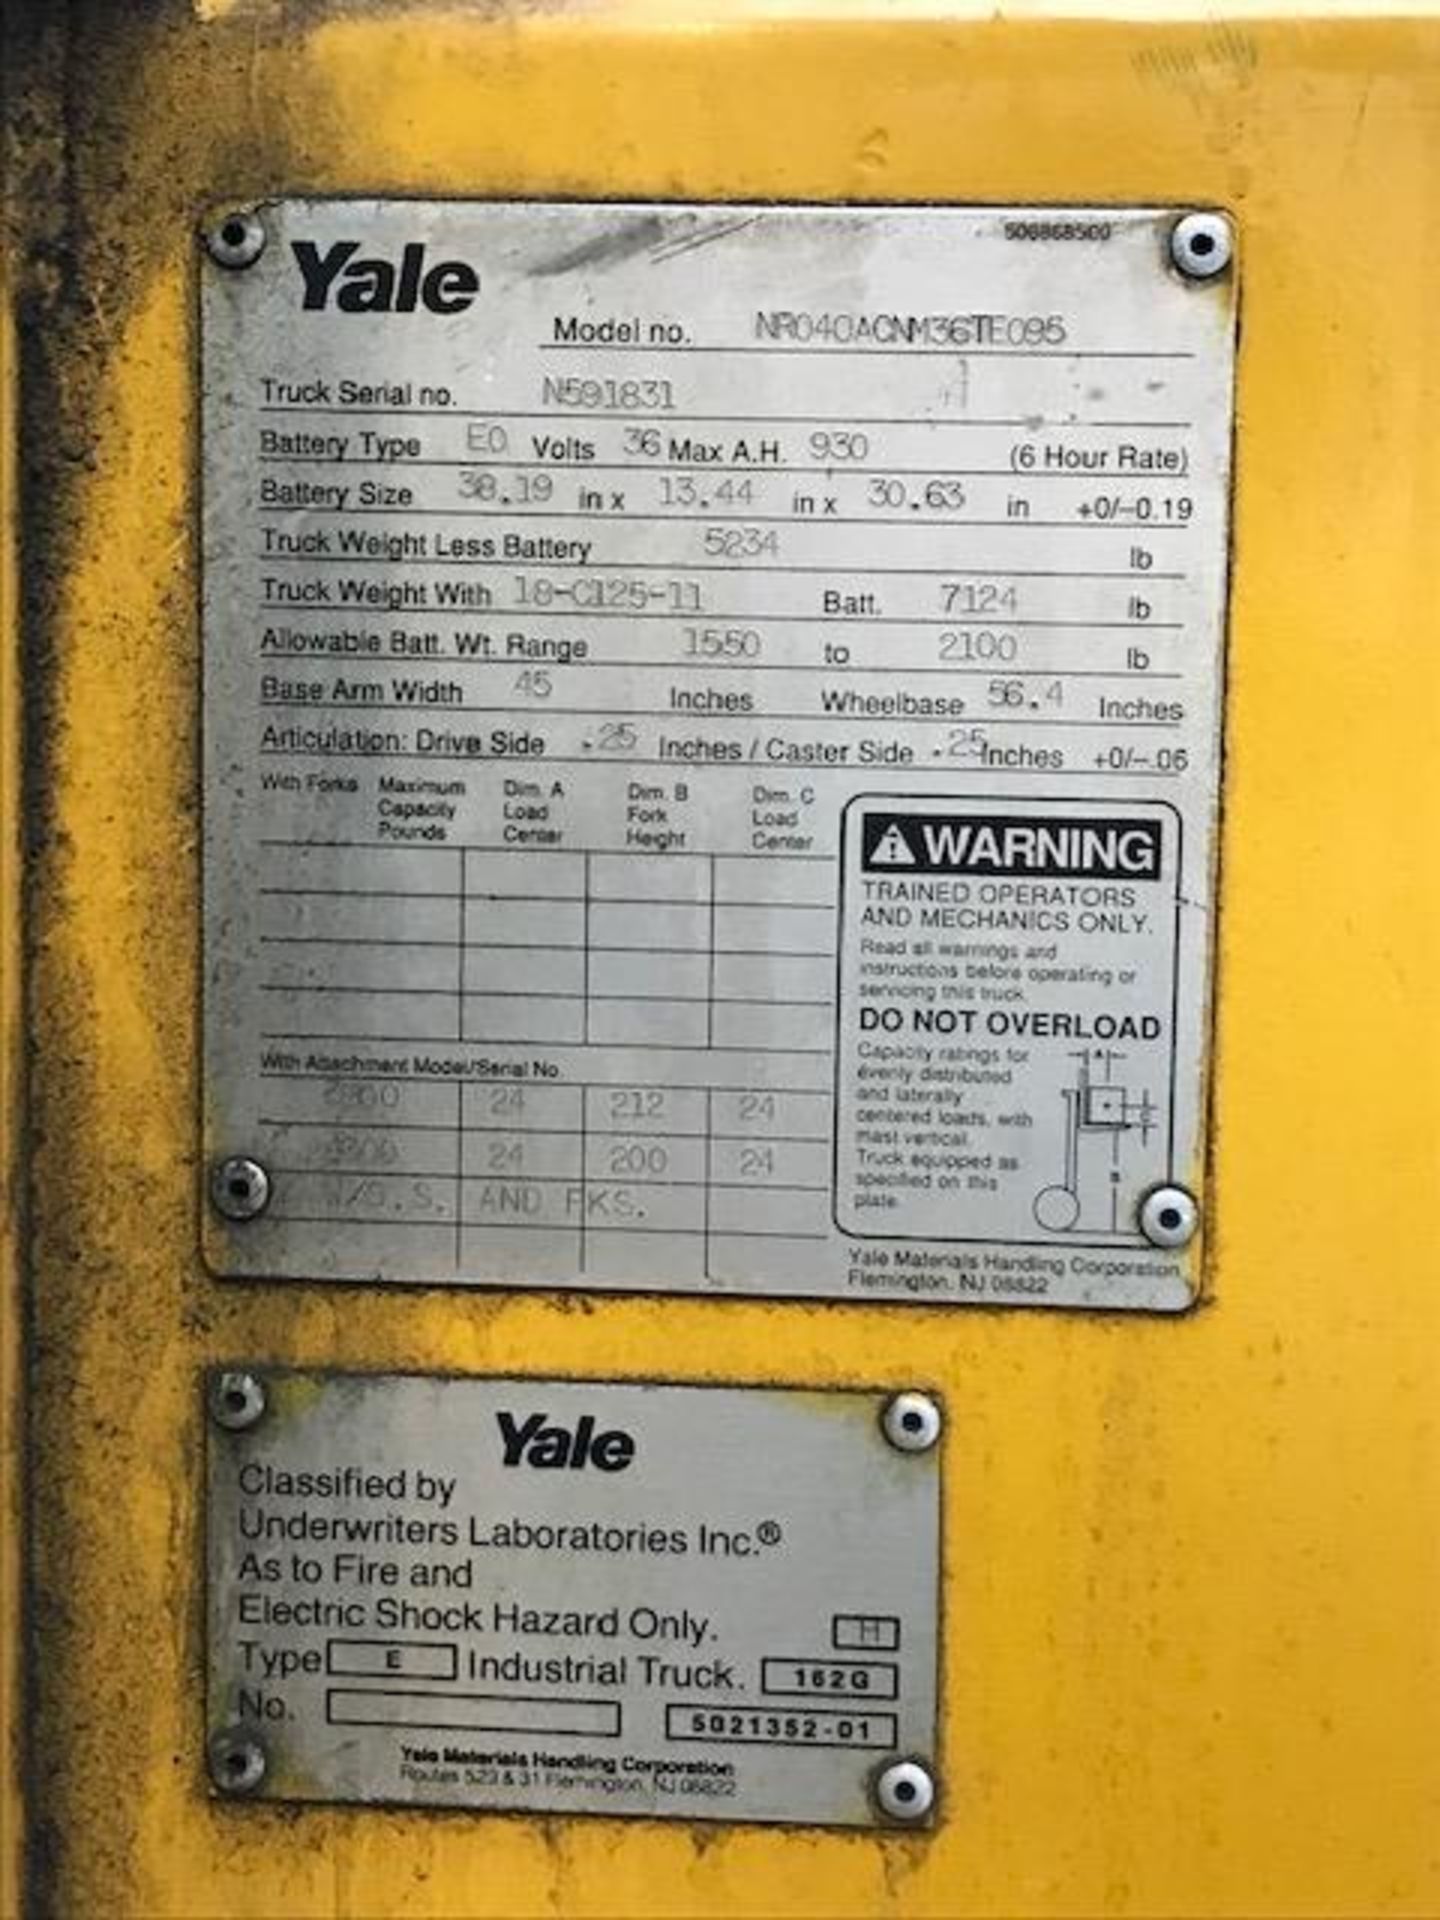 Yale Reach Lift, cap: 4,500lbs, 36 votls (NO Charger, Battery Functional but Weak) THIS LOT IS - Image 5 of 5